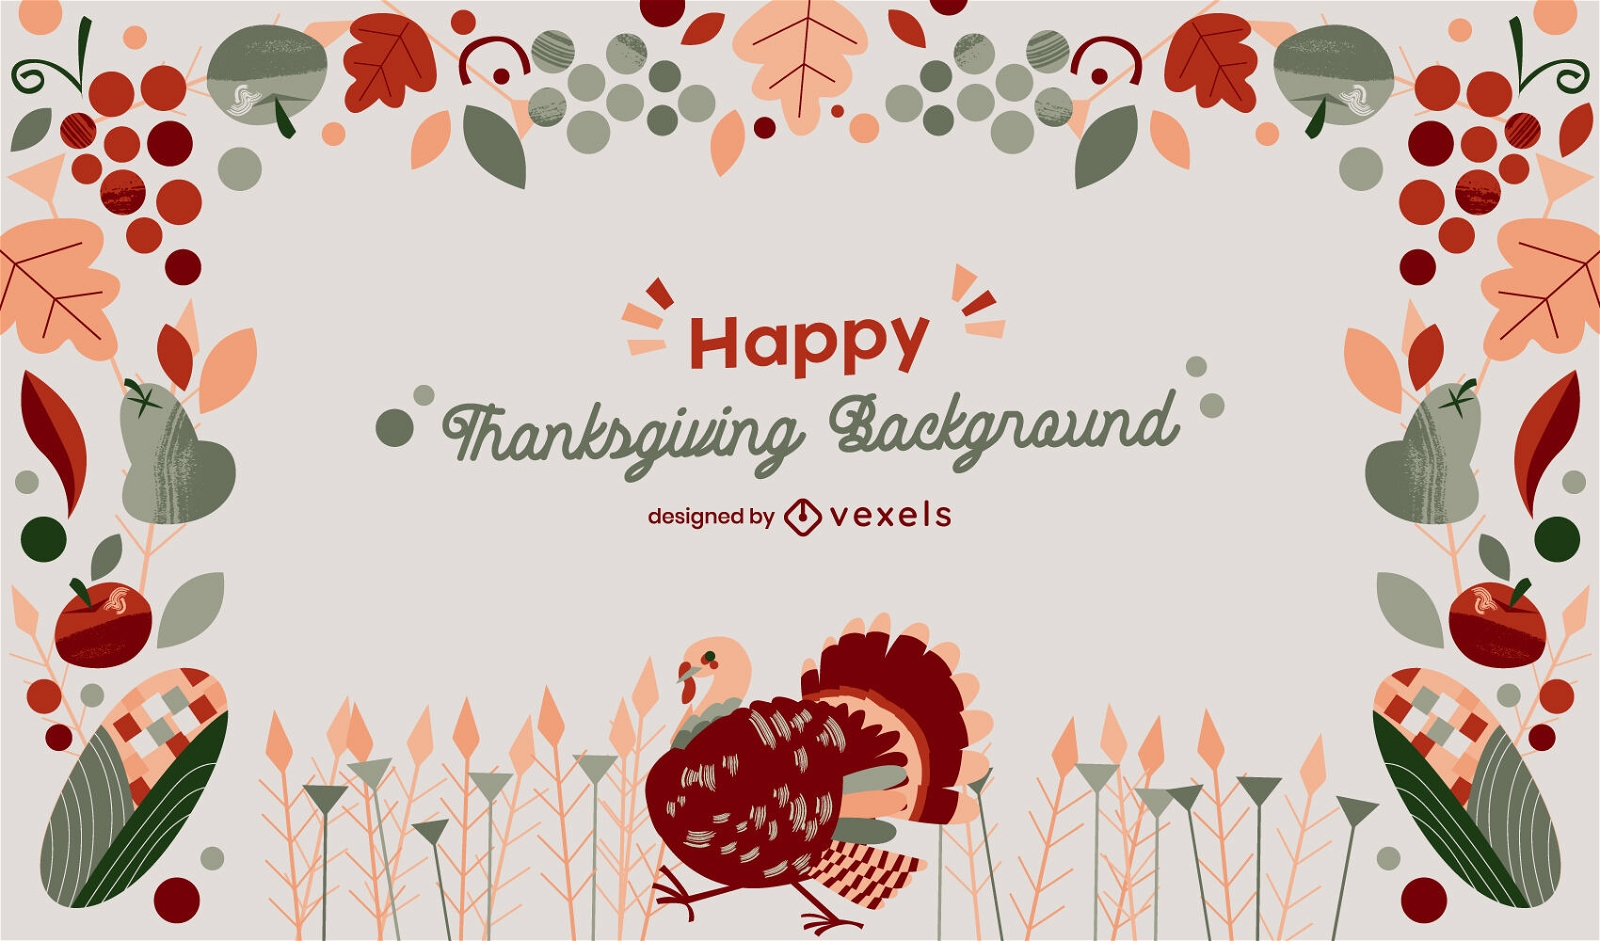 Thanksgiving holiday background design